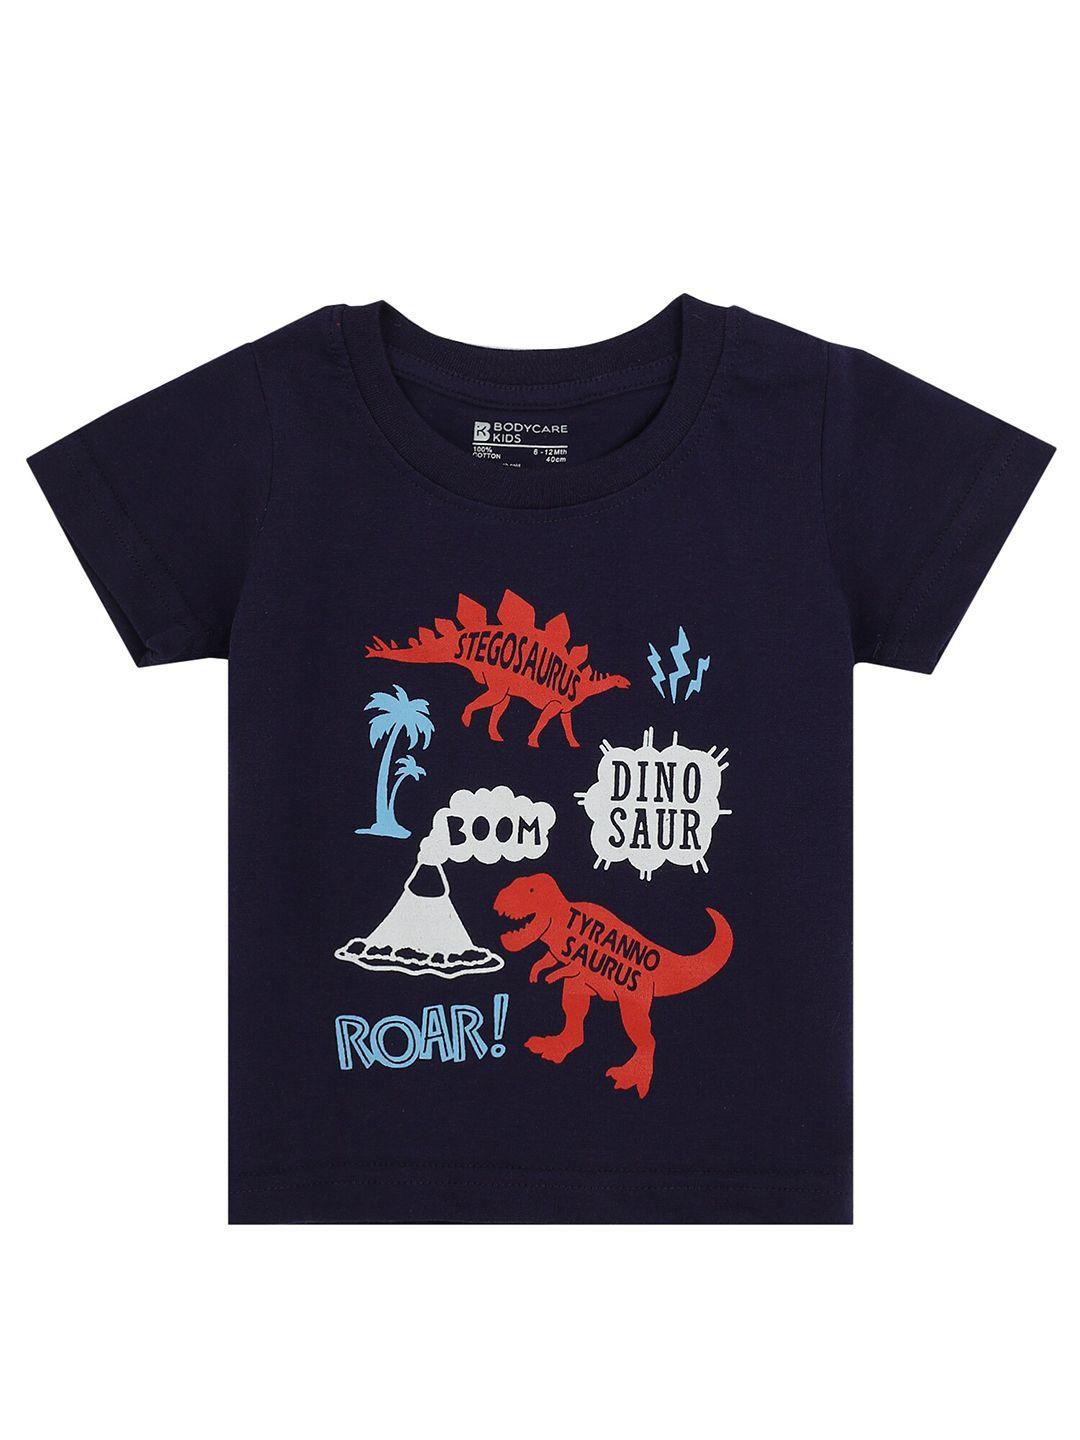 bodycare kids boys navy blue & red printed t-shirt with shorts